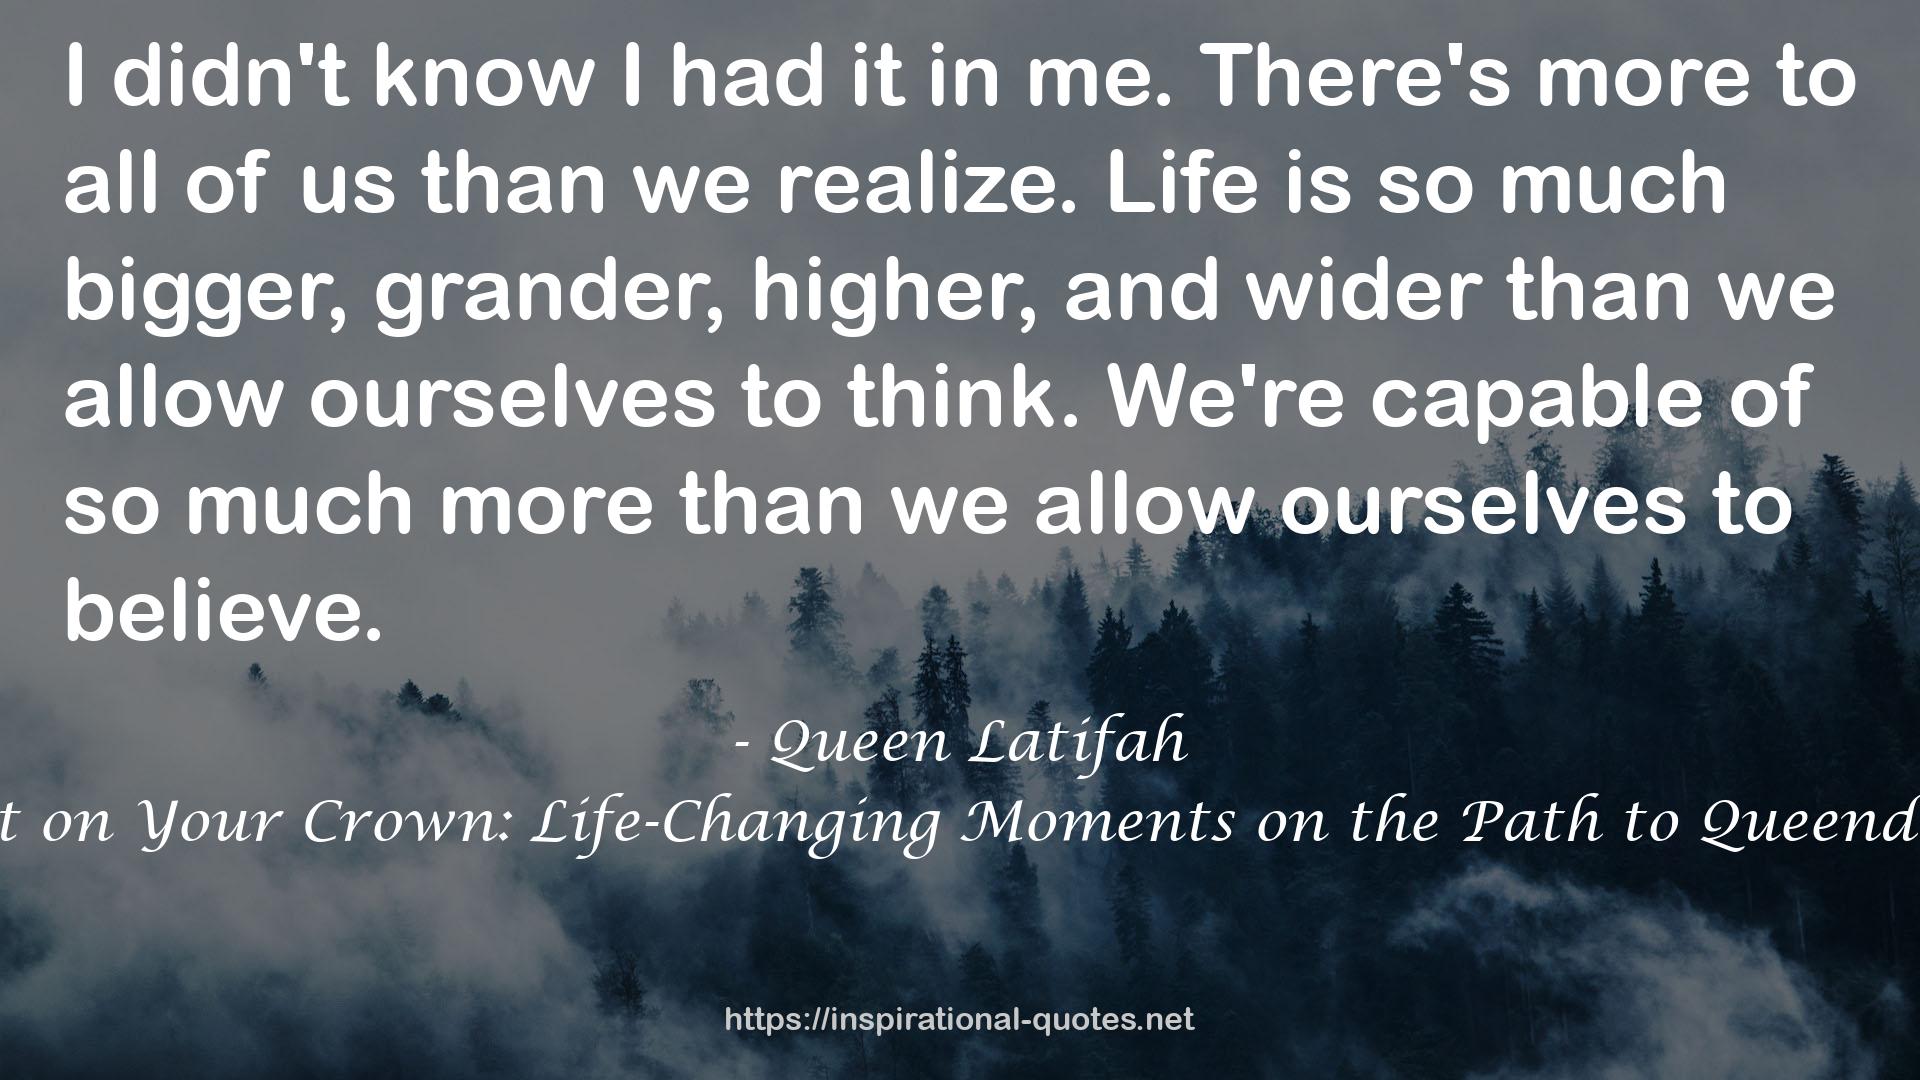 Put on Your Crown: Life-Changing Moments on the Path to Queendom QUOTES